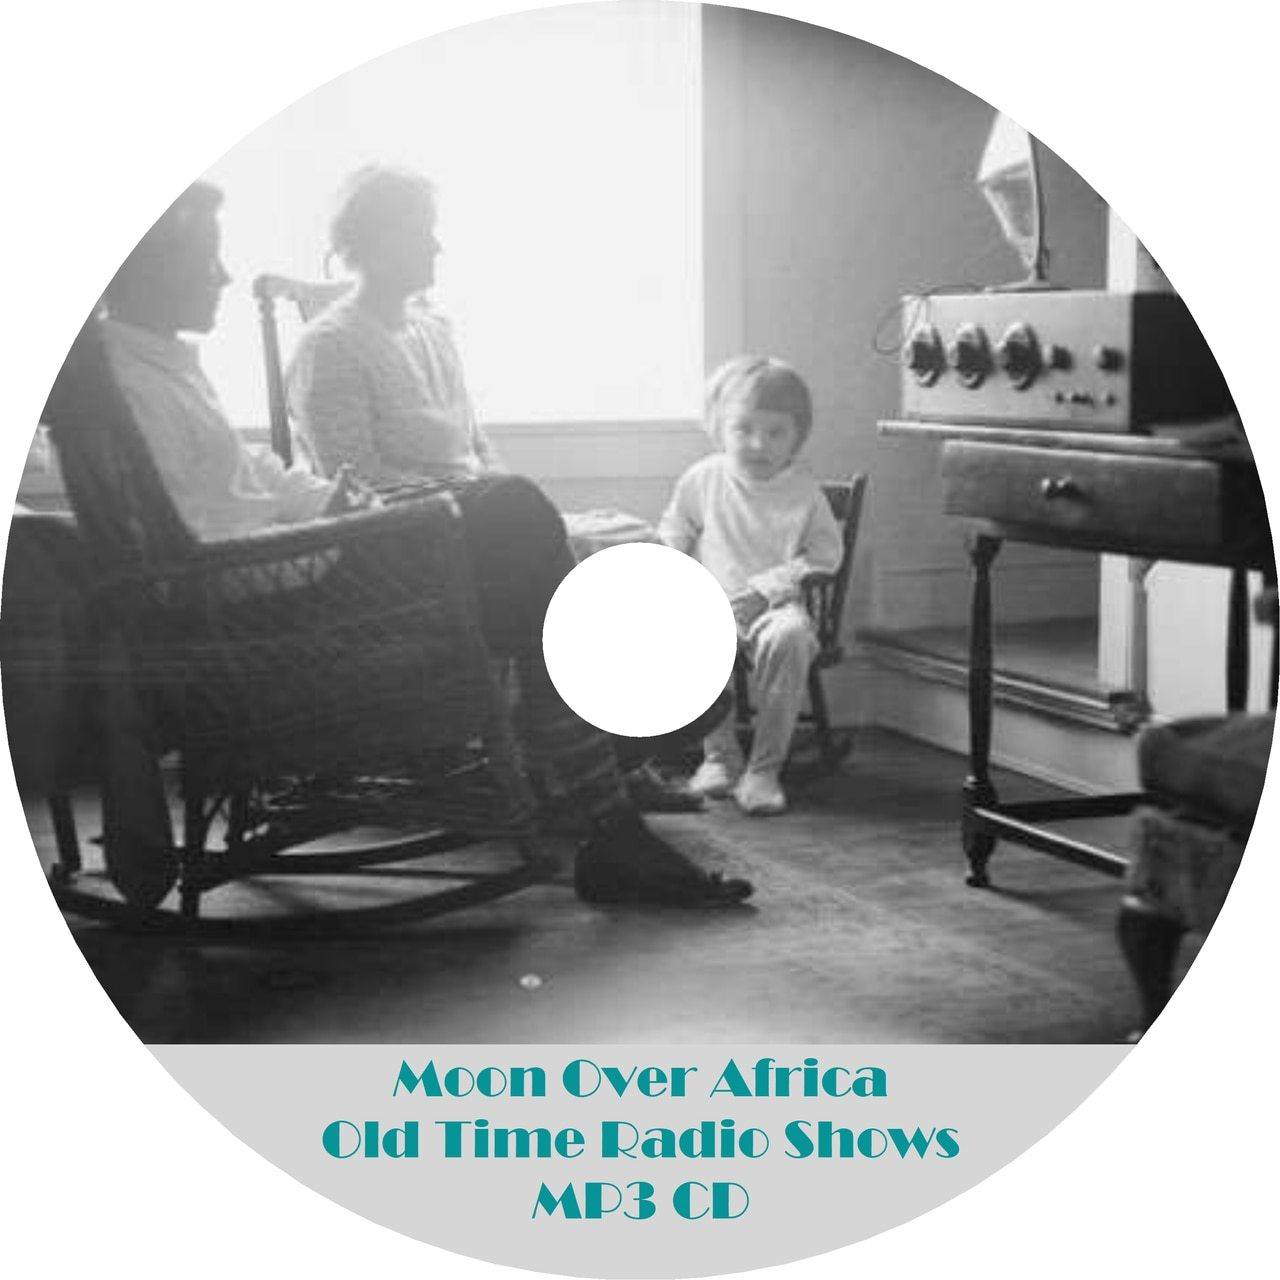 Moon Over Africa Old Time Radio Shows 26 Episodes On MP3 CD - OTR World